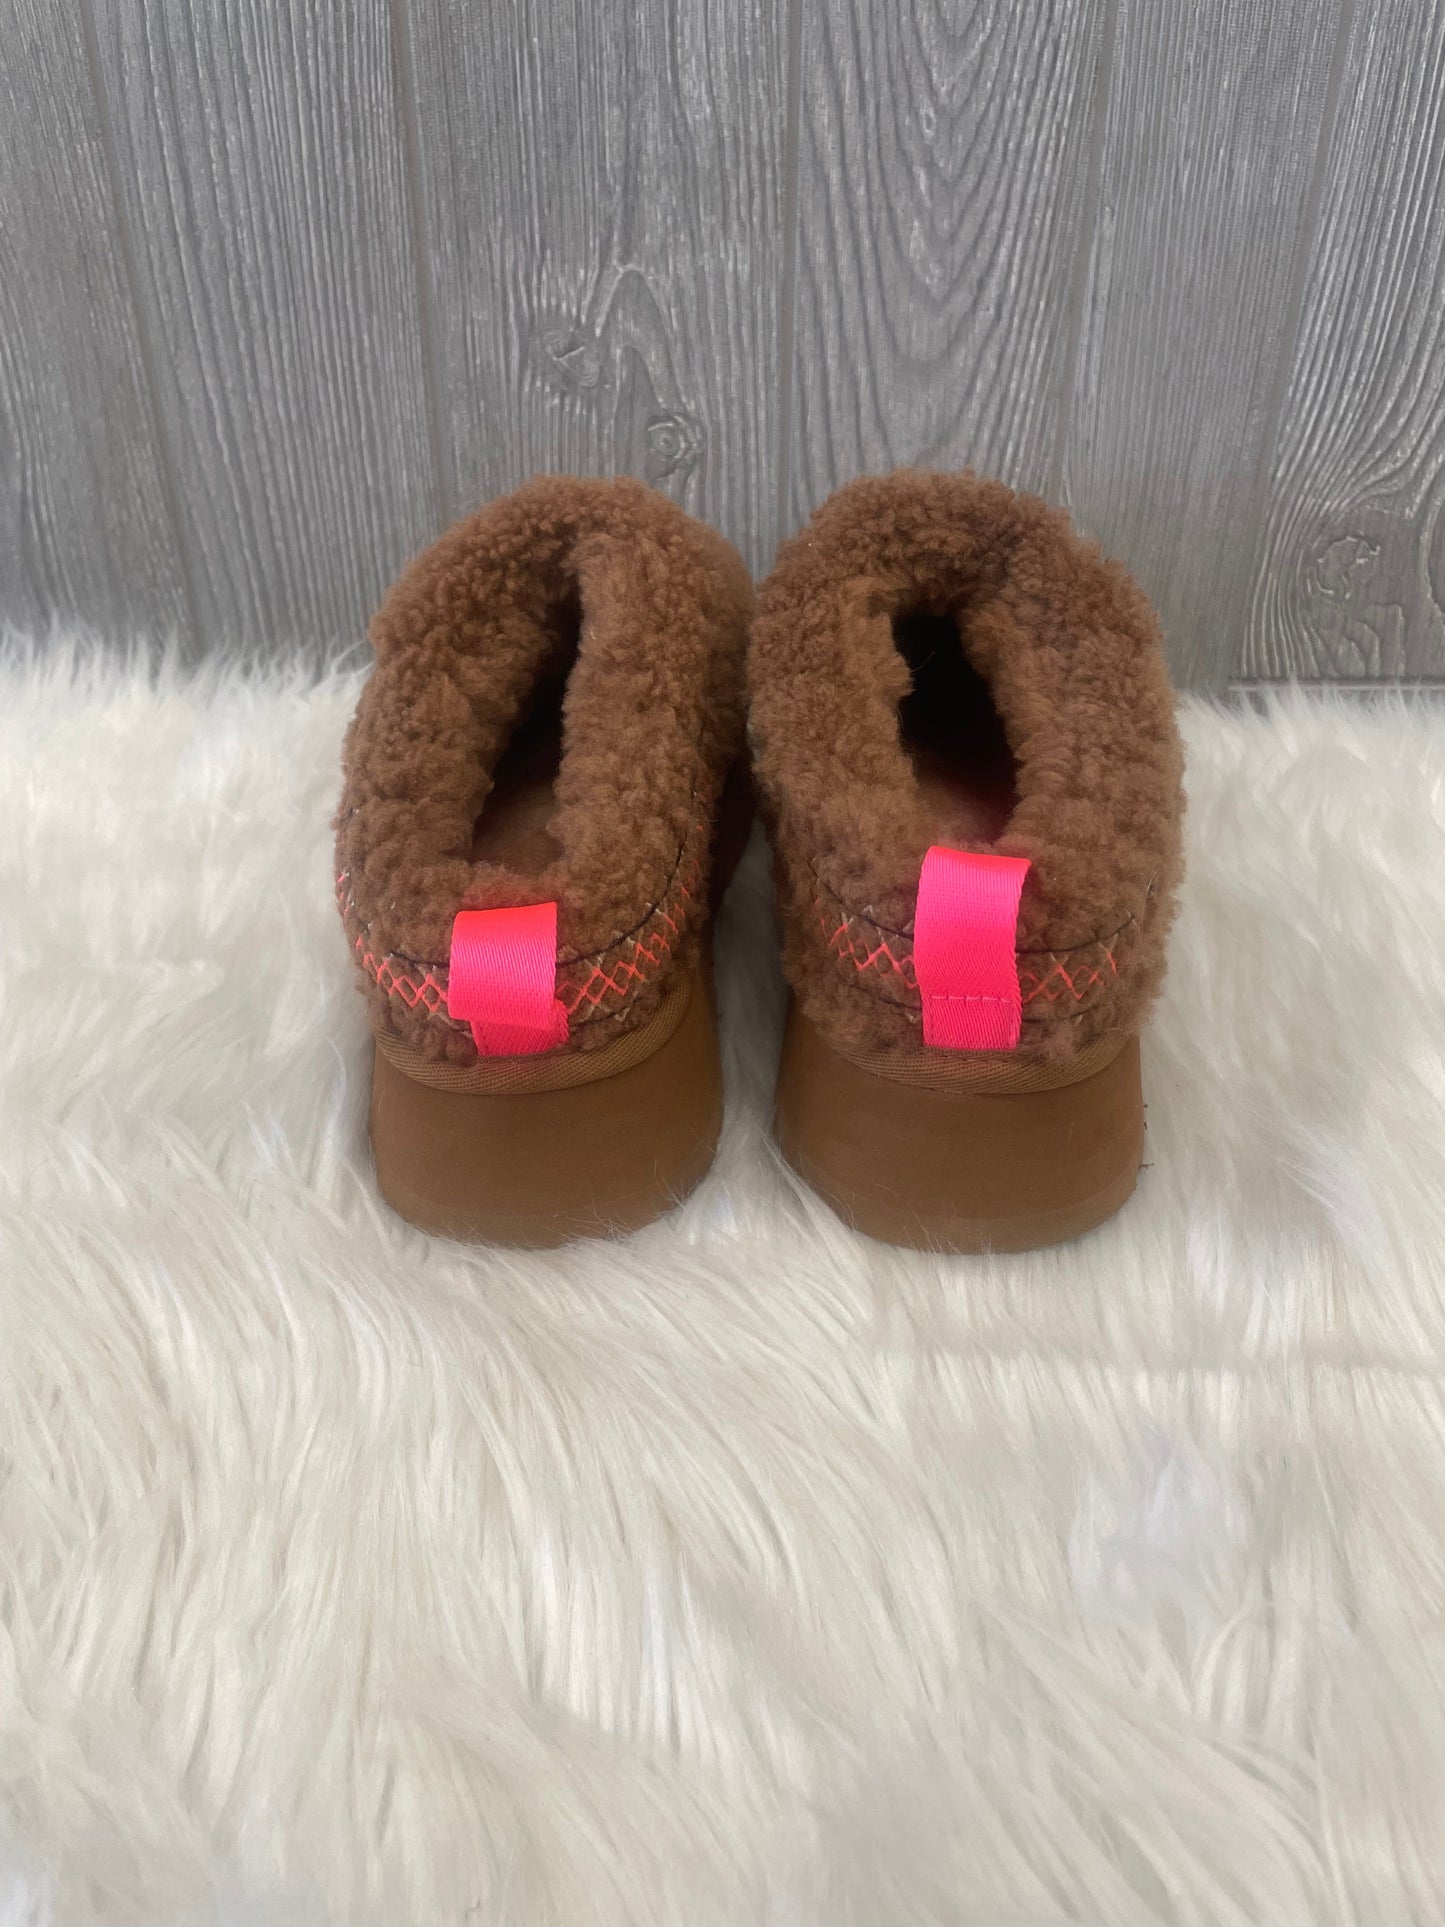 Shoes Flats By Ugg  Size: 7